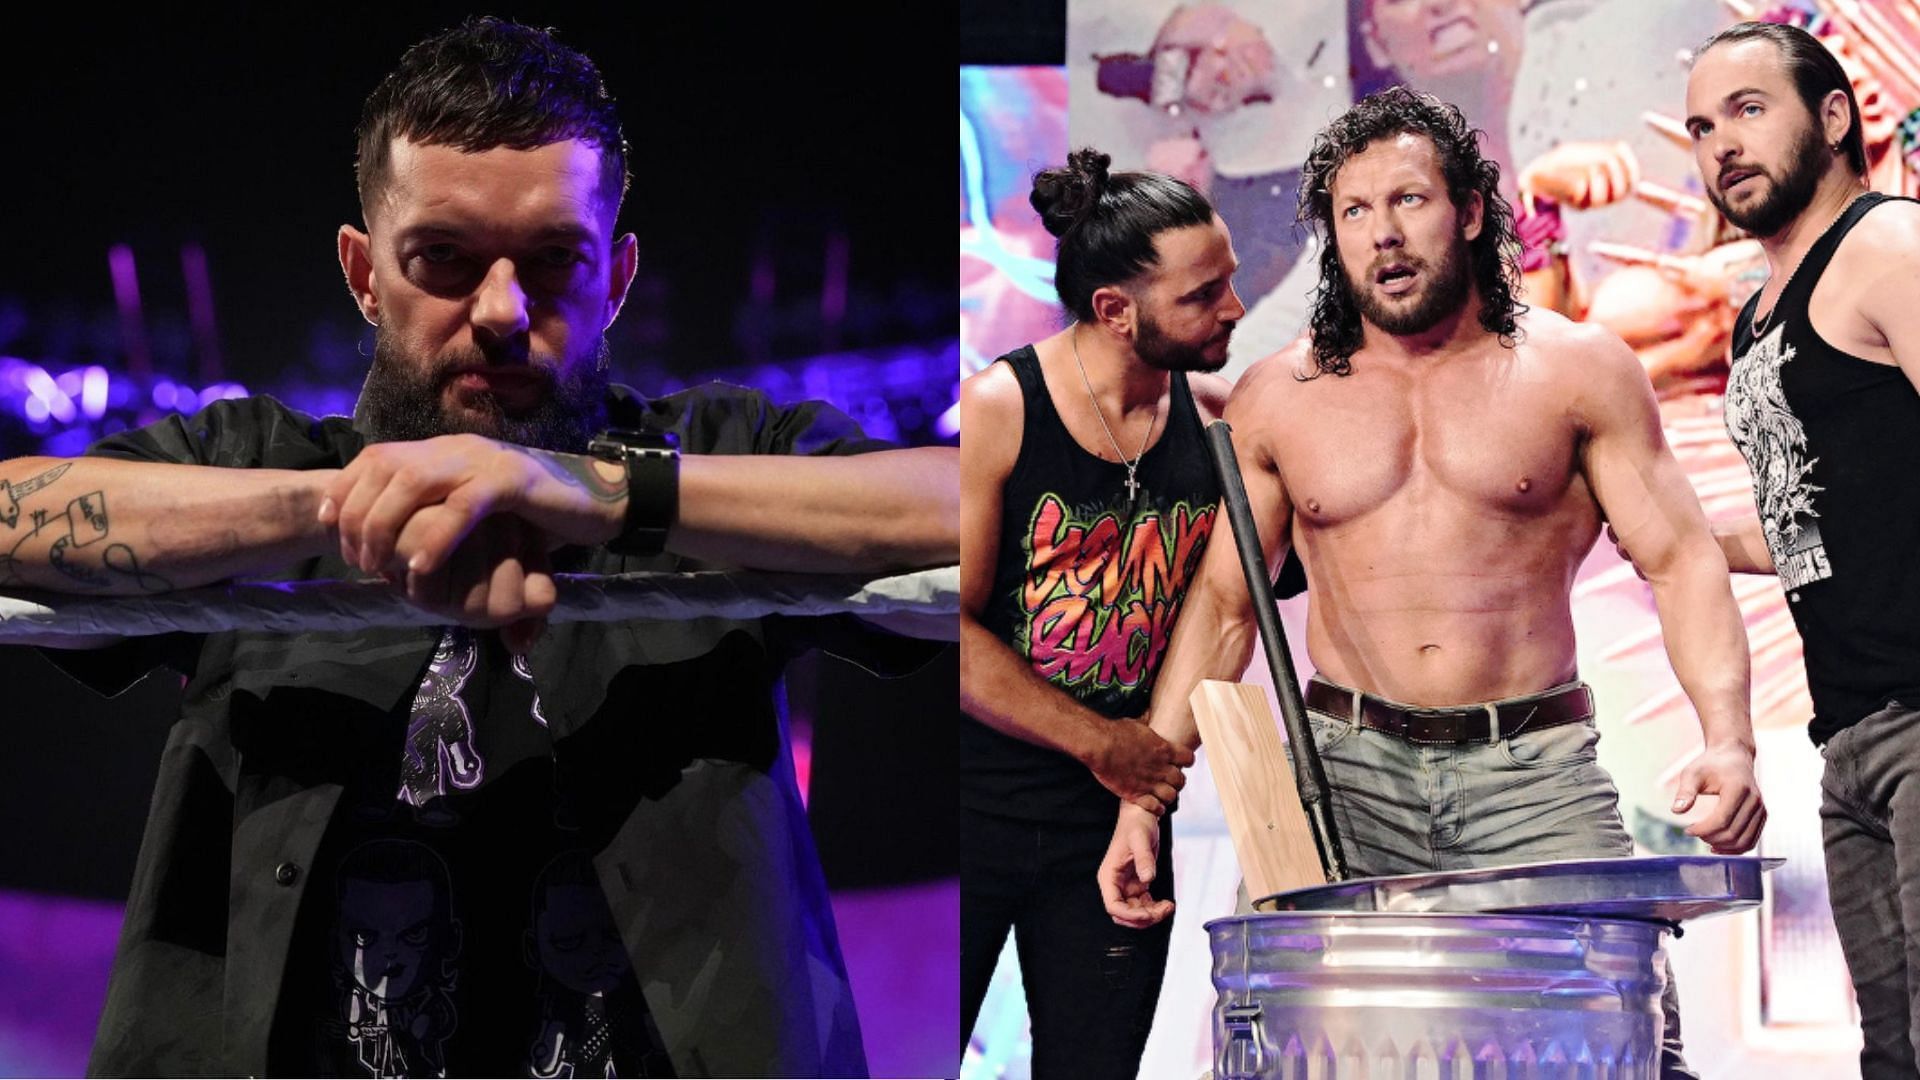 Finn Balor is open to reuniting with The Young Bucks and Kenny Omega